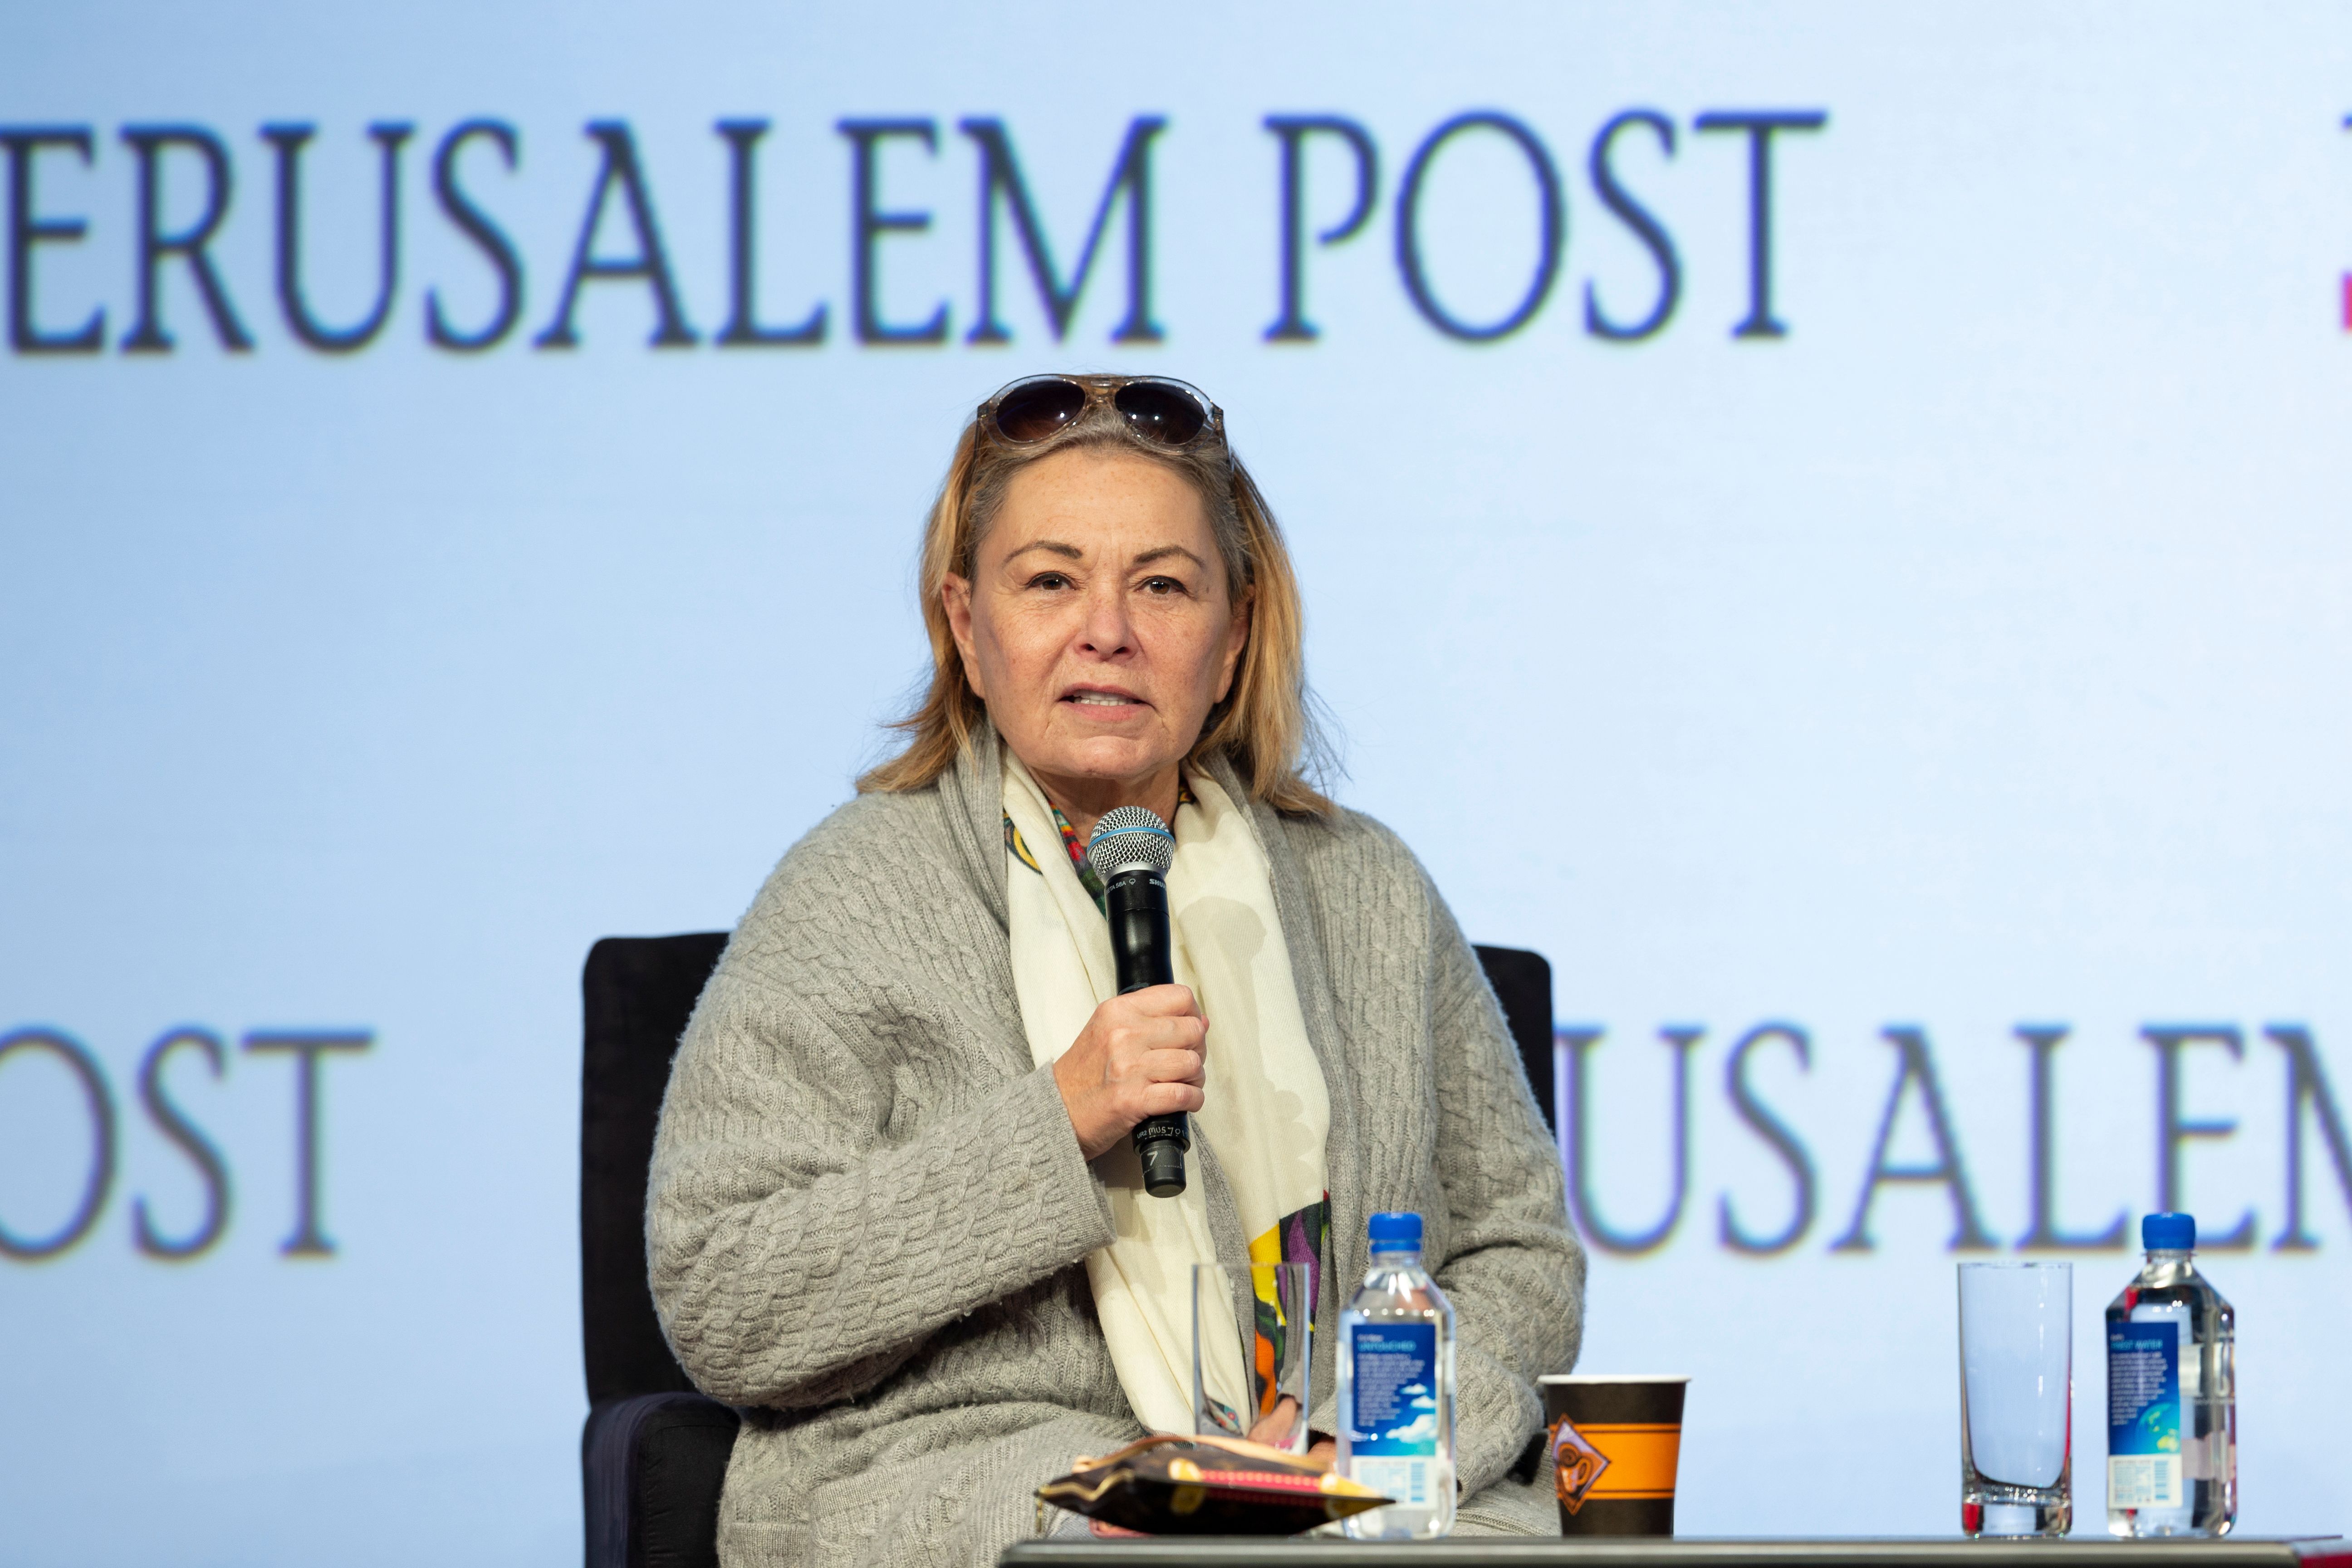 Roseanne Barr wears a gray sweater and holds a microphone.